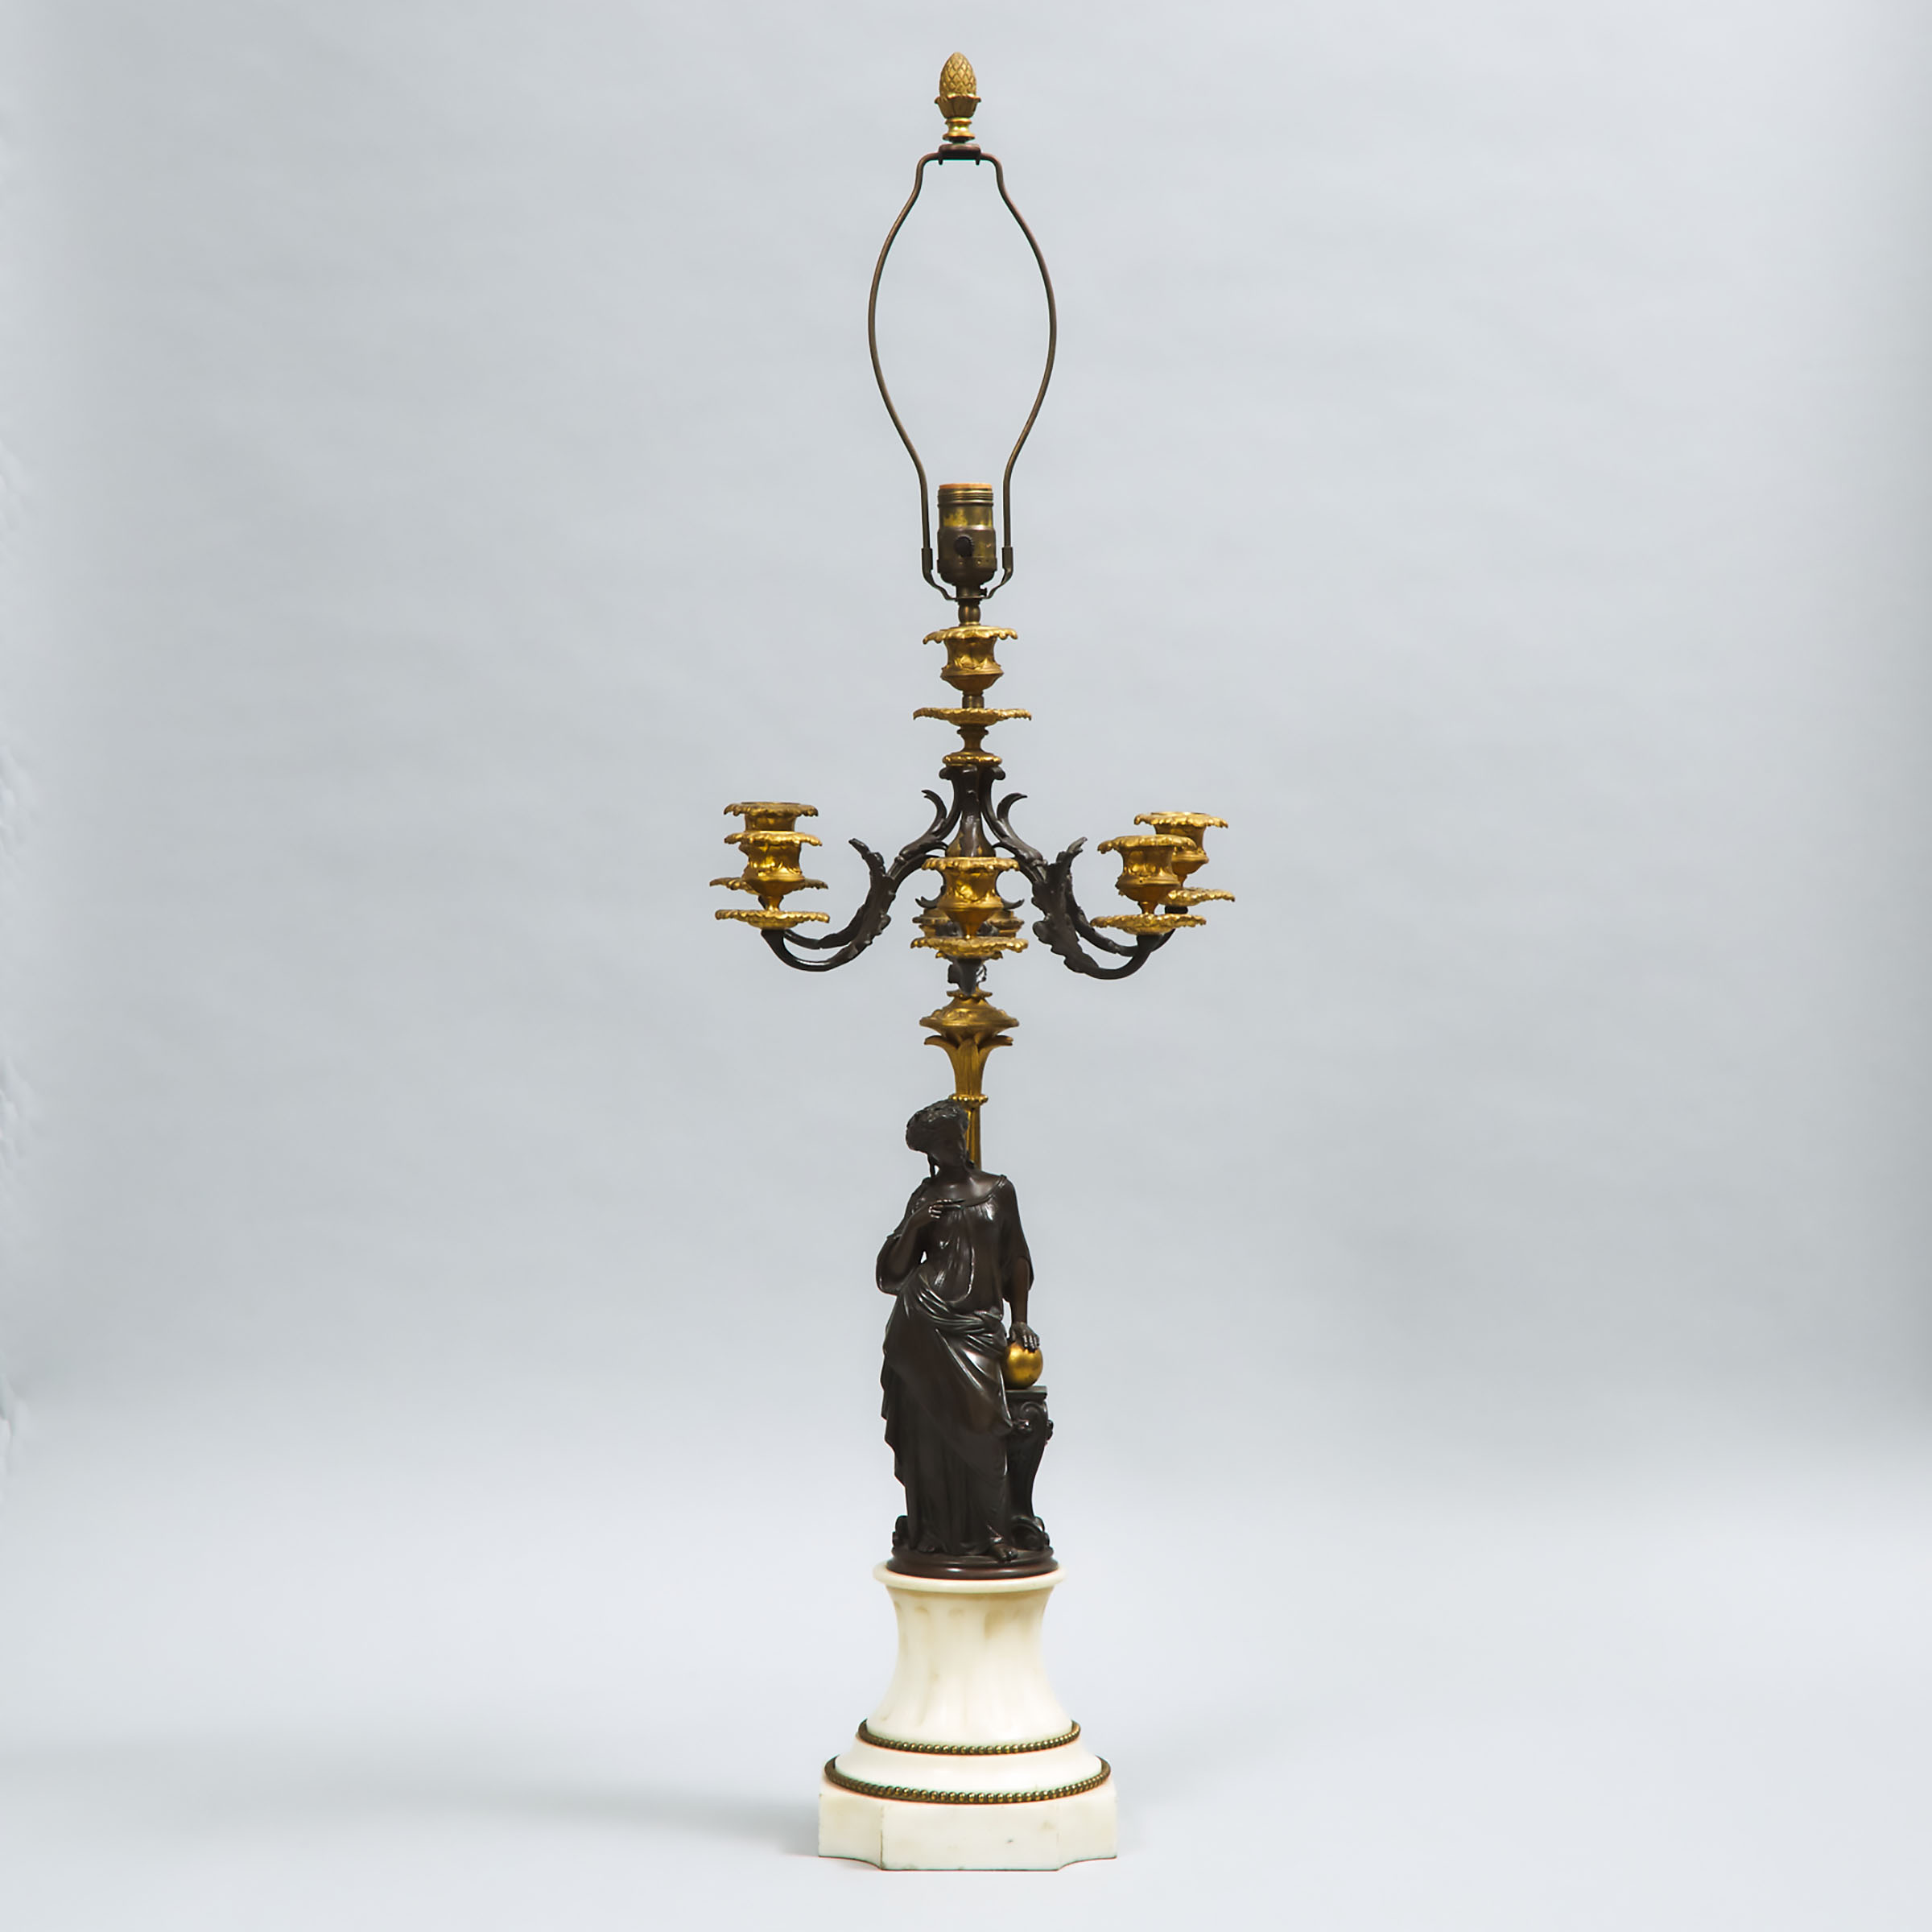 French Neoclassical Gilt and Patinated Bronze Figural Table Lamp, early 20th century